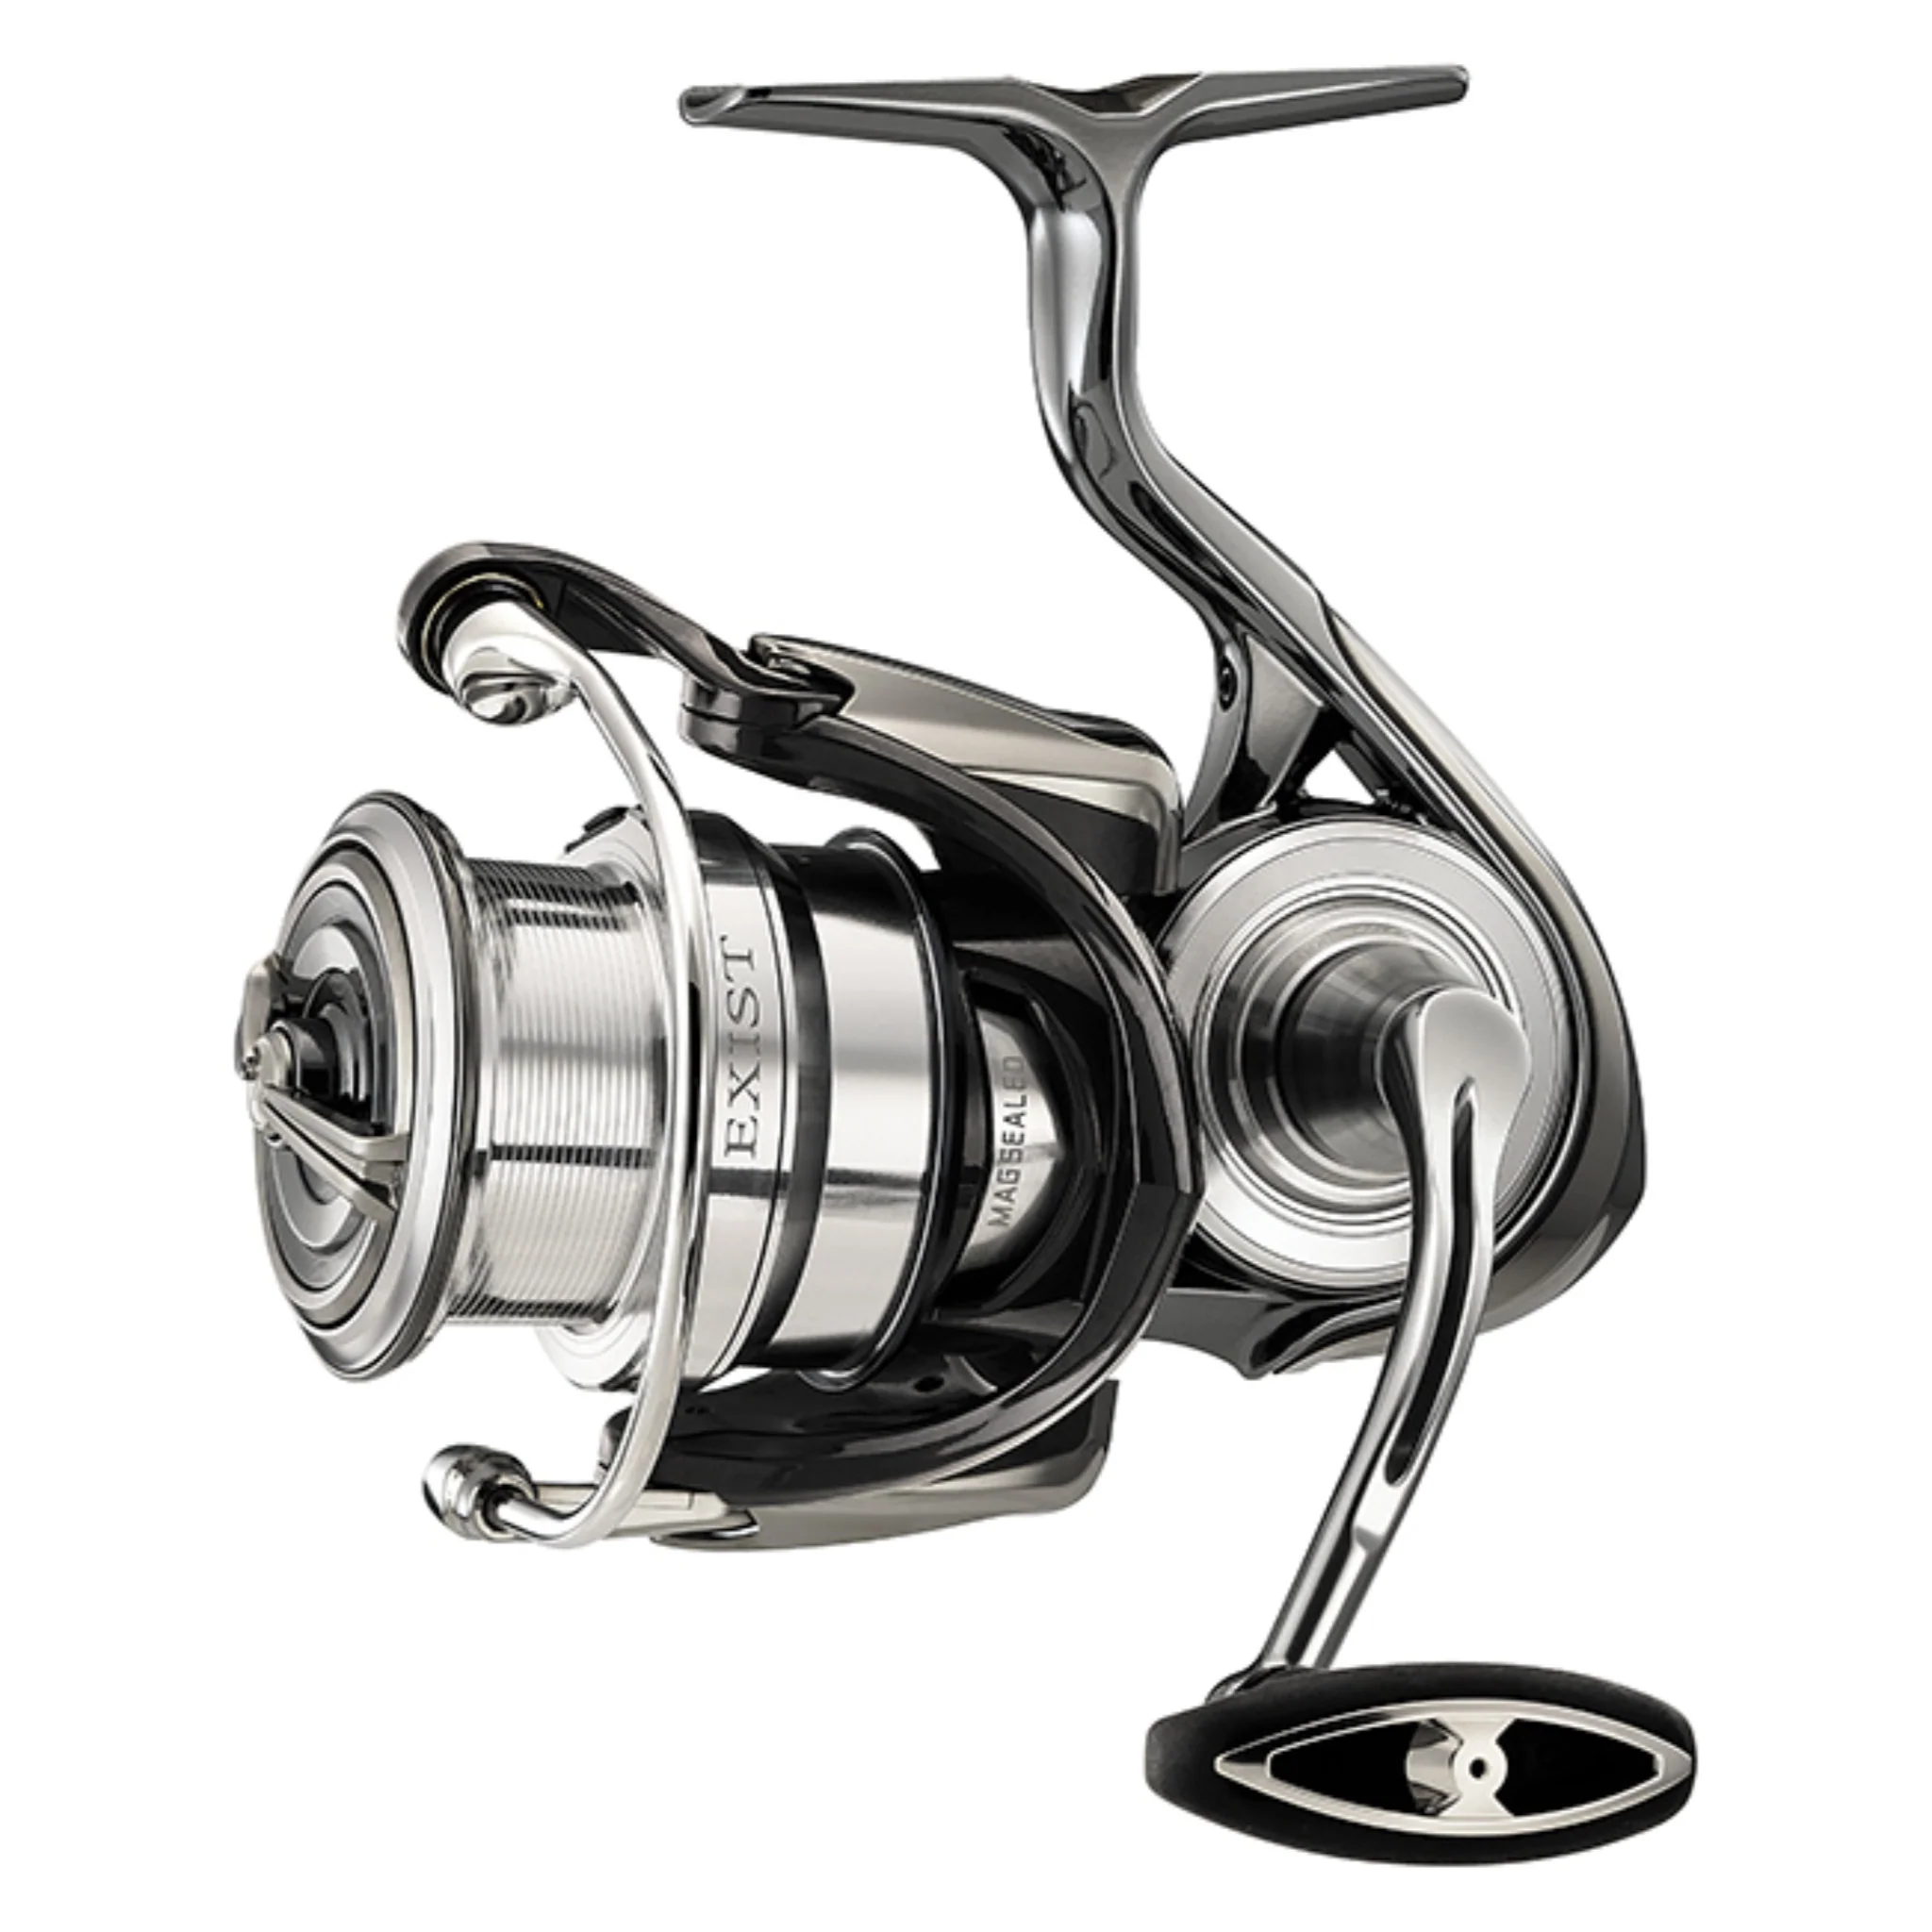  Daiwa Exist Right Hand 18 Exist-G LT 4000D-C Spinning Reel :  Sports & Outdoors